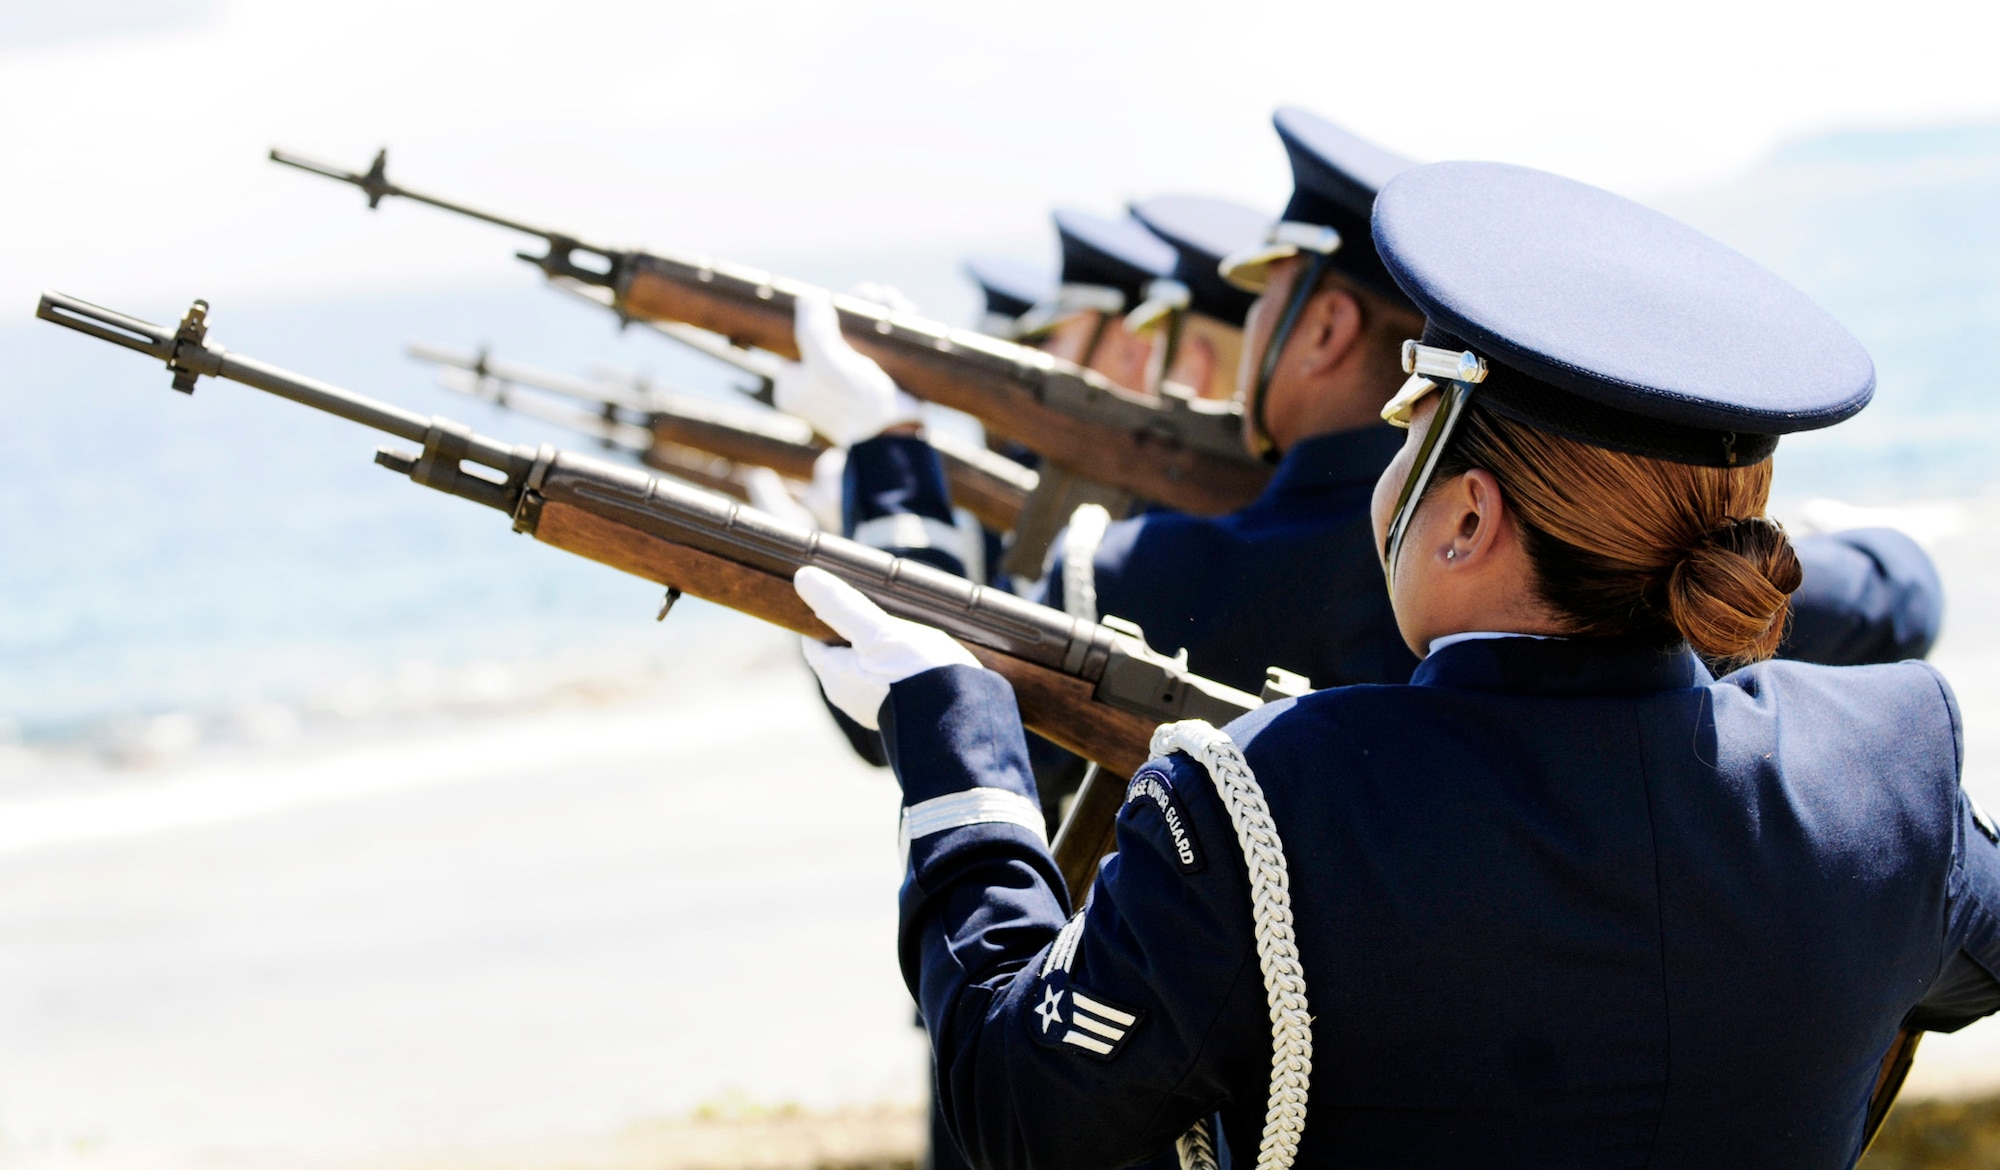 Airmen from the 36th Wing Honor Guard at Andersen Air Force Base, Guam, conduct a 21-gun salute July 20 during the RAIDR 21 Memorial Unveiling Ceremony at the Governor's Complex at Adelup Point in Hagatna, Guam. Family, friends and co-workers of the RAIDR 21 aircrew along with residents of the local Guam community honored the fallen aircrew with the ceremony where a memorial dedicated to the Airmen was unveiled. The aircrew died when their B-52 Stratofortress crashed off the coast of Guam July 21, 2008. (U.S. Air Force photo/Airman 1st Class Courtney Witt)